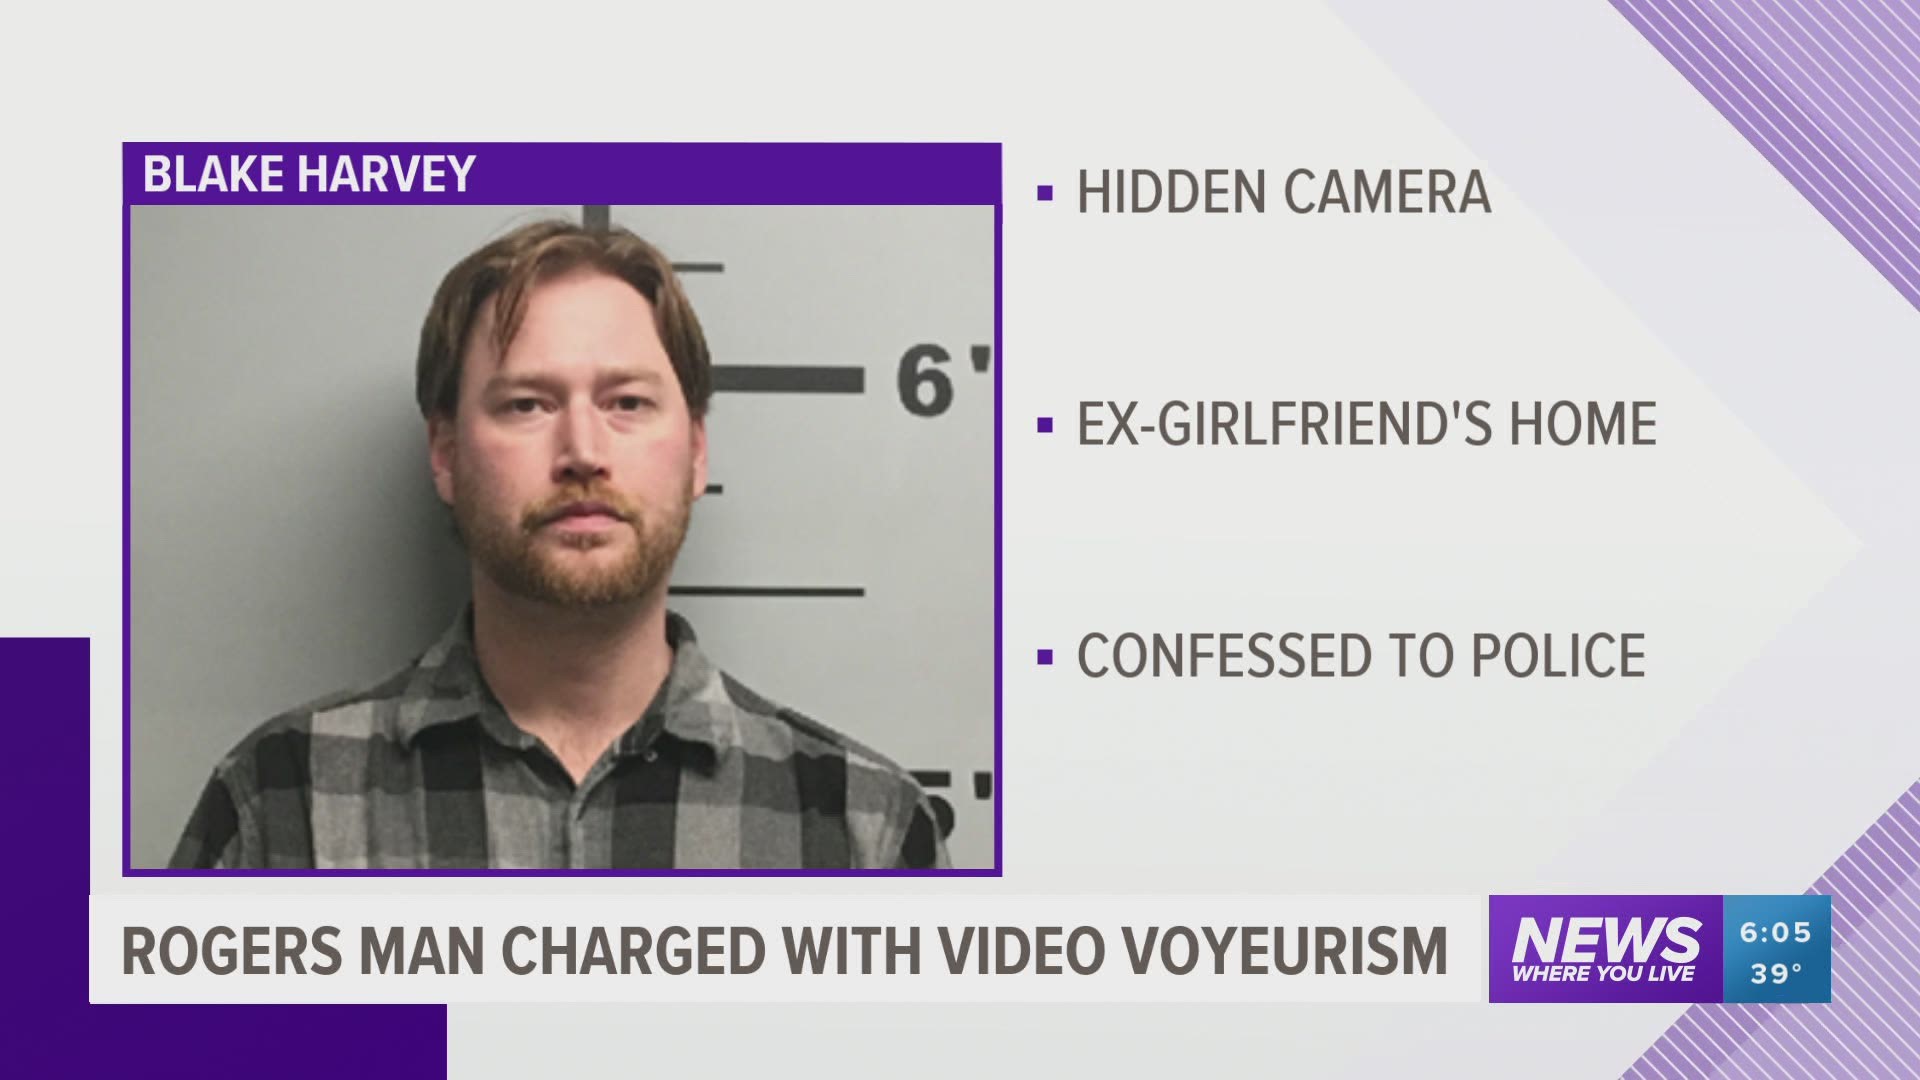 Rogers man charged with video voyeurism for hiding cameras in ex-girlfriend's home.